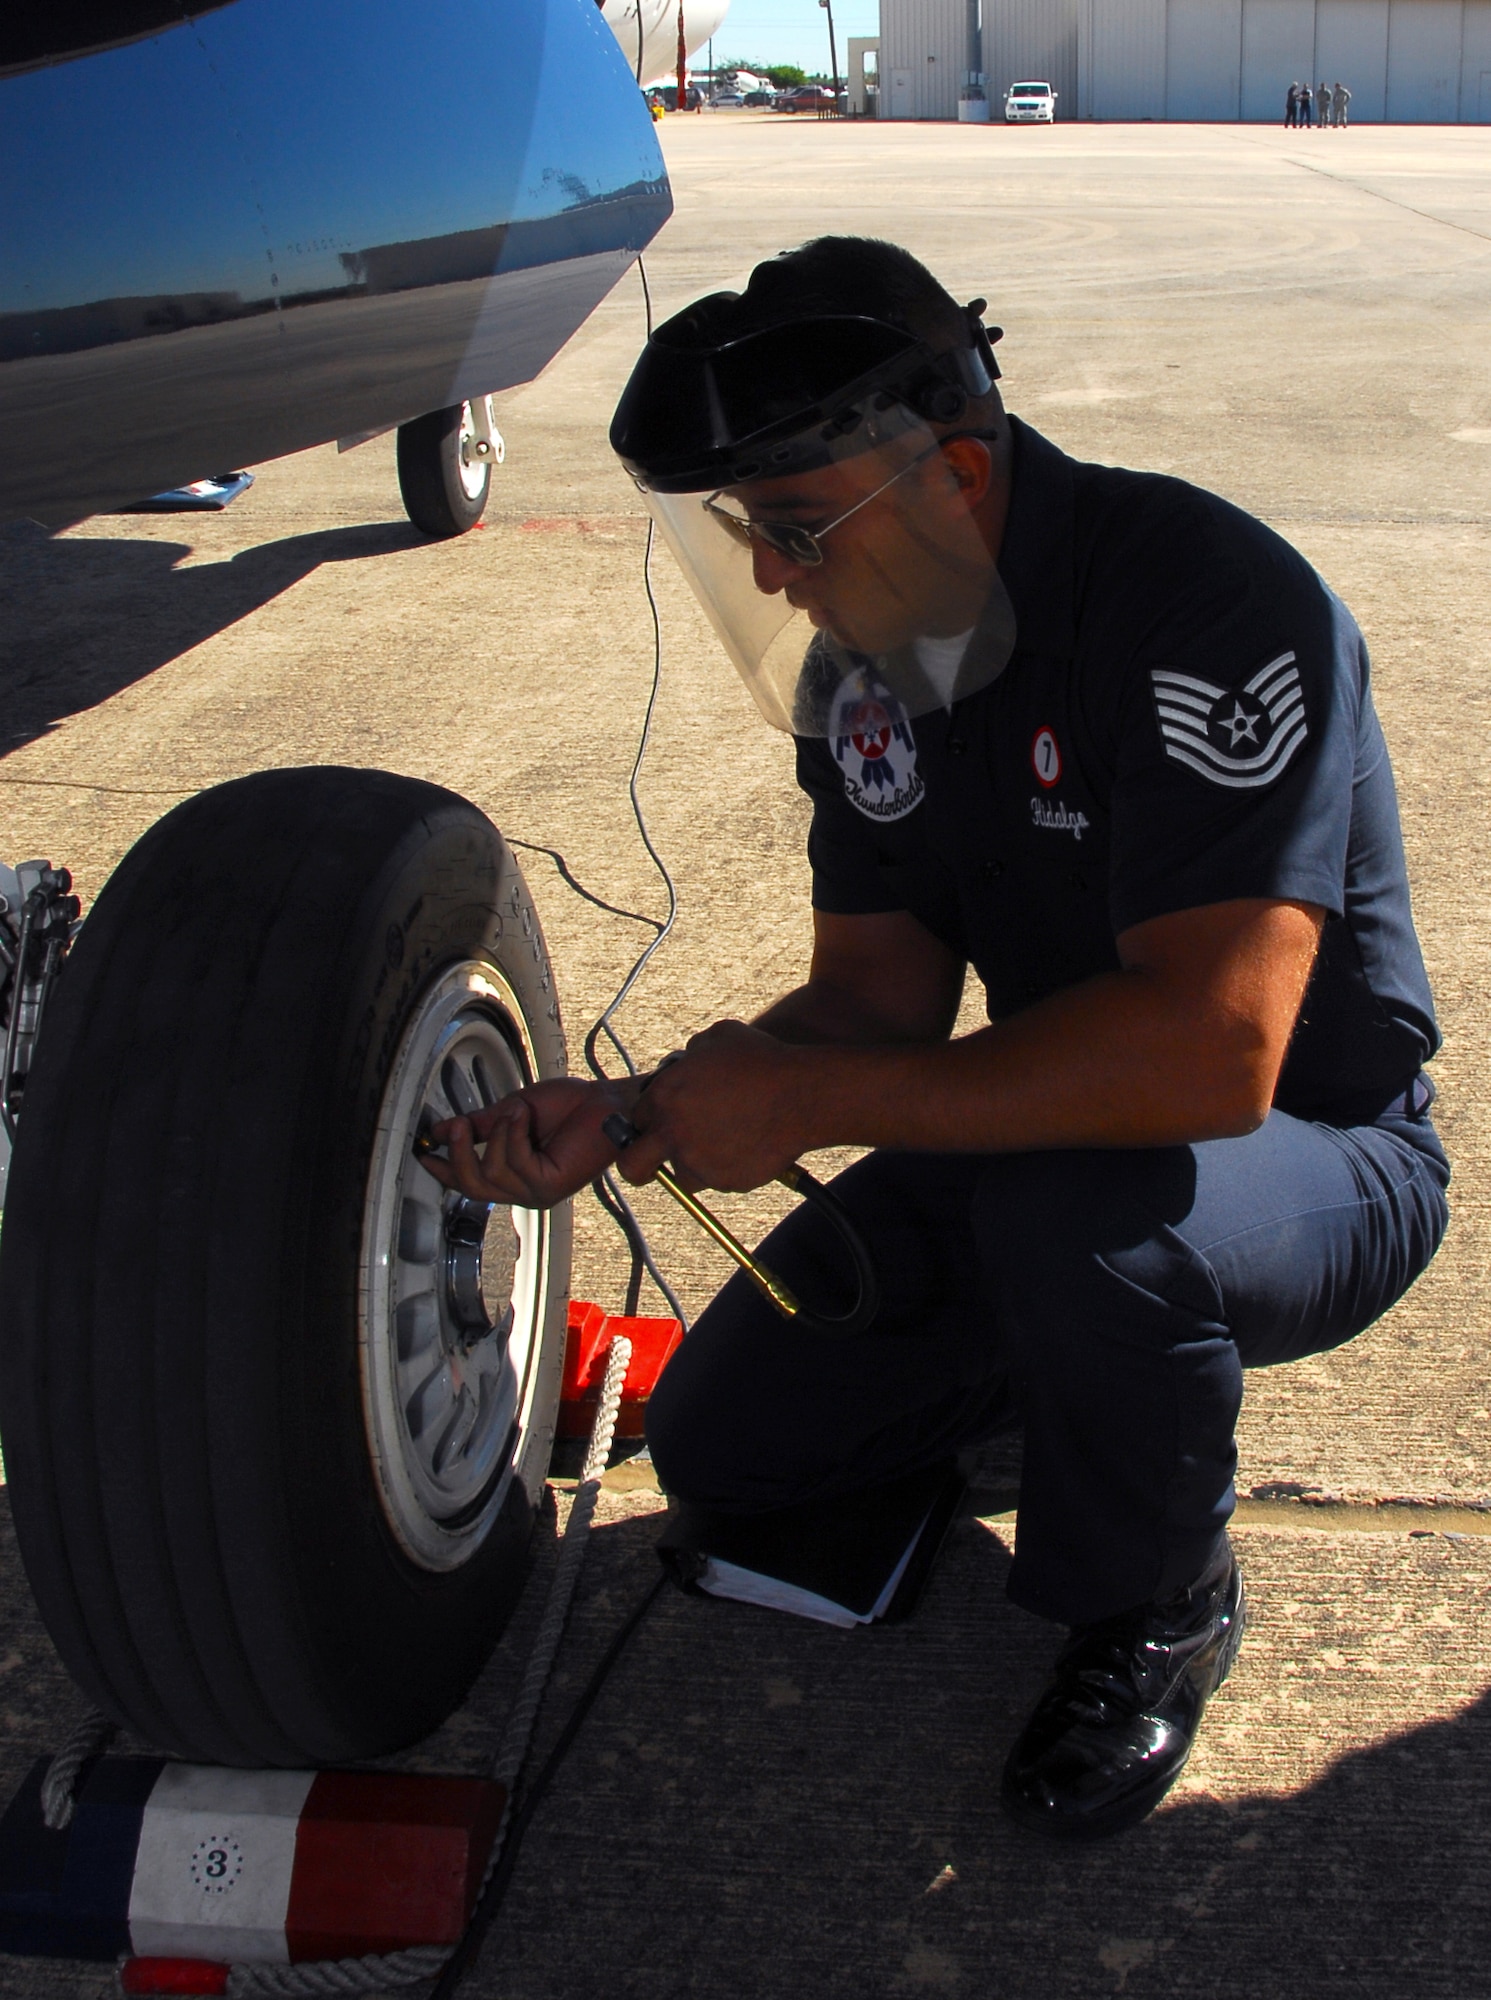 Tech. Sgt. Jose Hidalgo checks the tire pressure on an Air Force Thunderbird F-16 Fighting Falcon during his pre-inspection Nov. 5, 2010, at Lackland Air Force Base, Texas. Sergeant Hidalgo is a Thunderbirds assistant crew chief.  The air demonstration team was at Lackland AFB to perform during AirFest 2010.  (U.S. Air Force photo/Staff Sgt Jamie Powell)